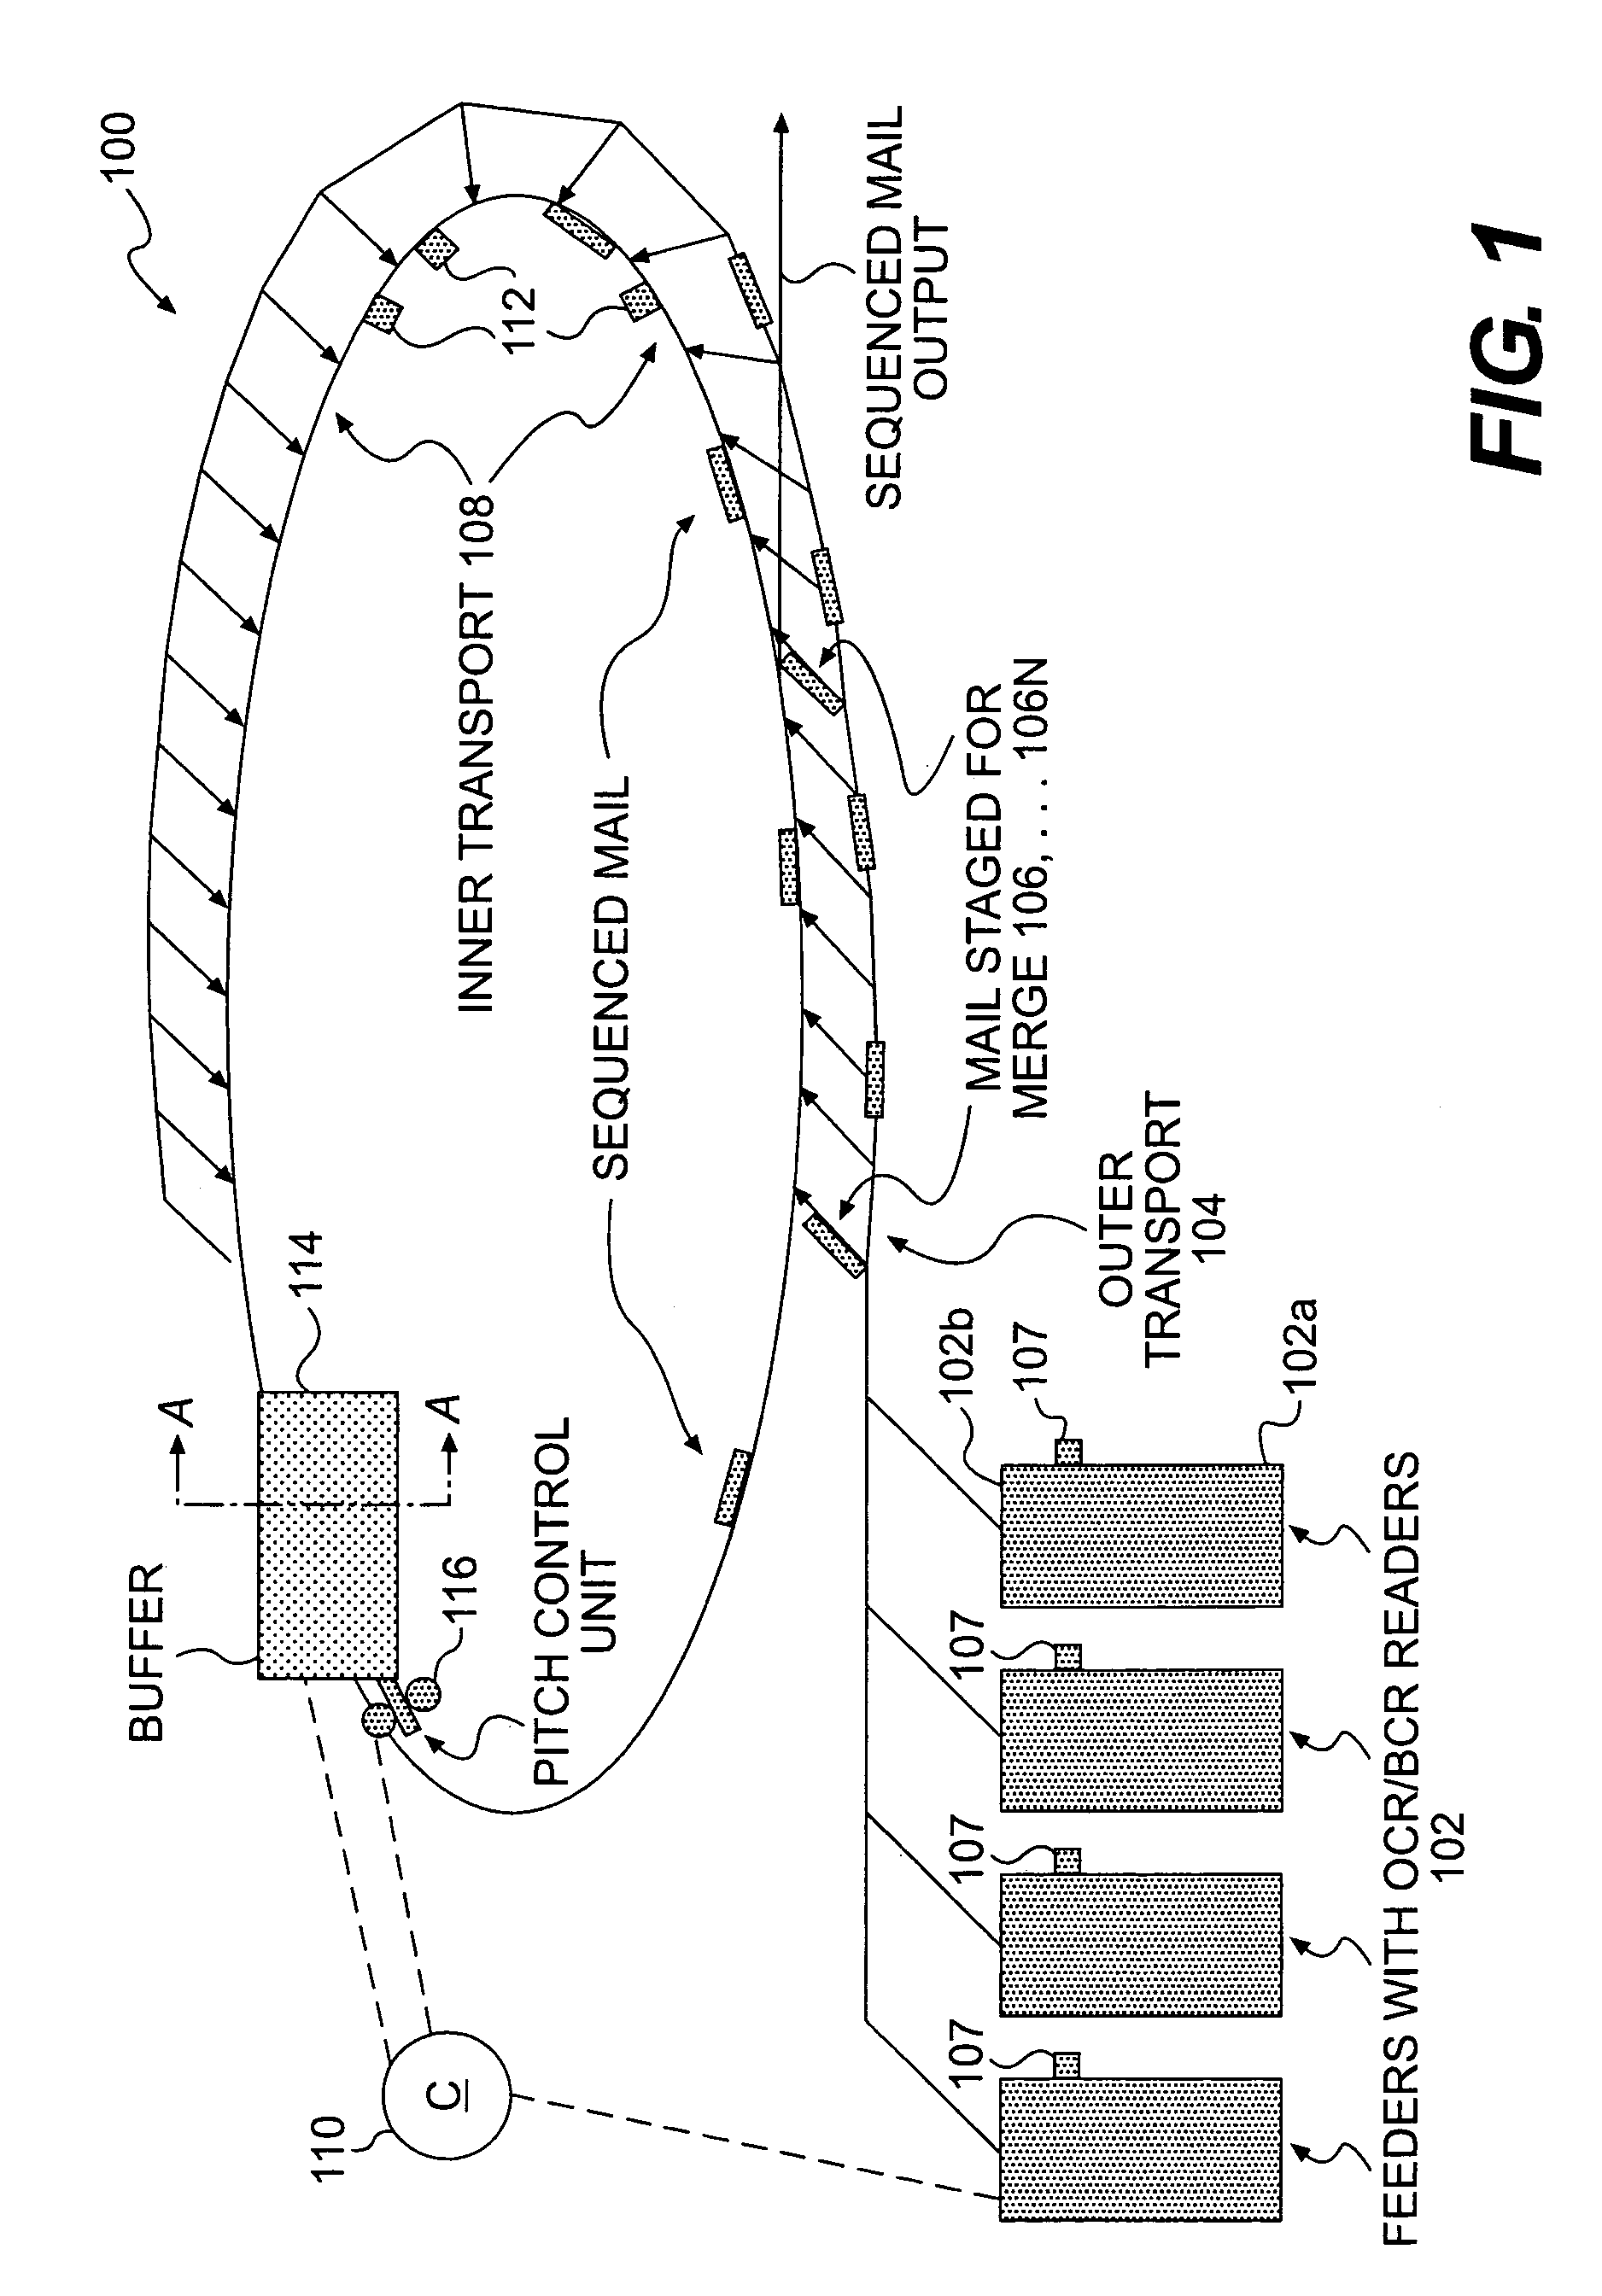 Single pass sequencer and method of use